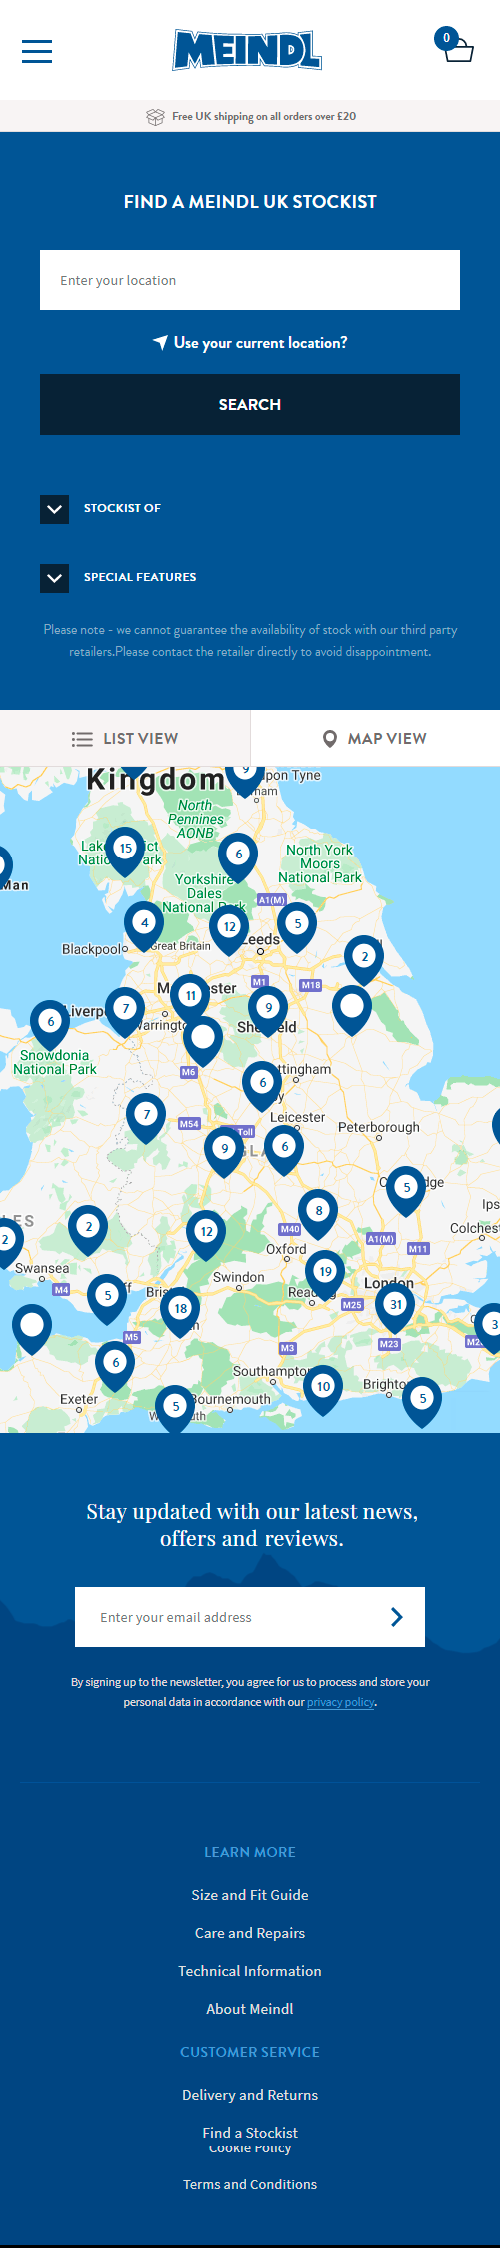 Meindl uk stockists map on mobile